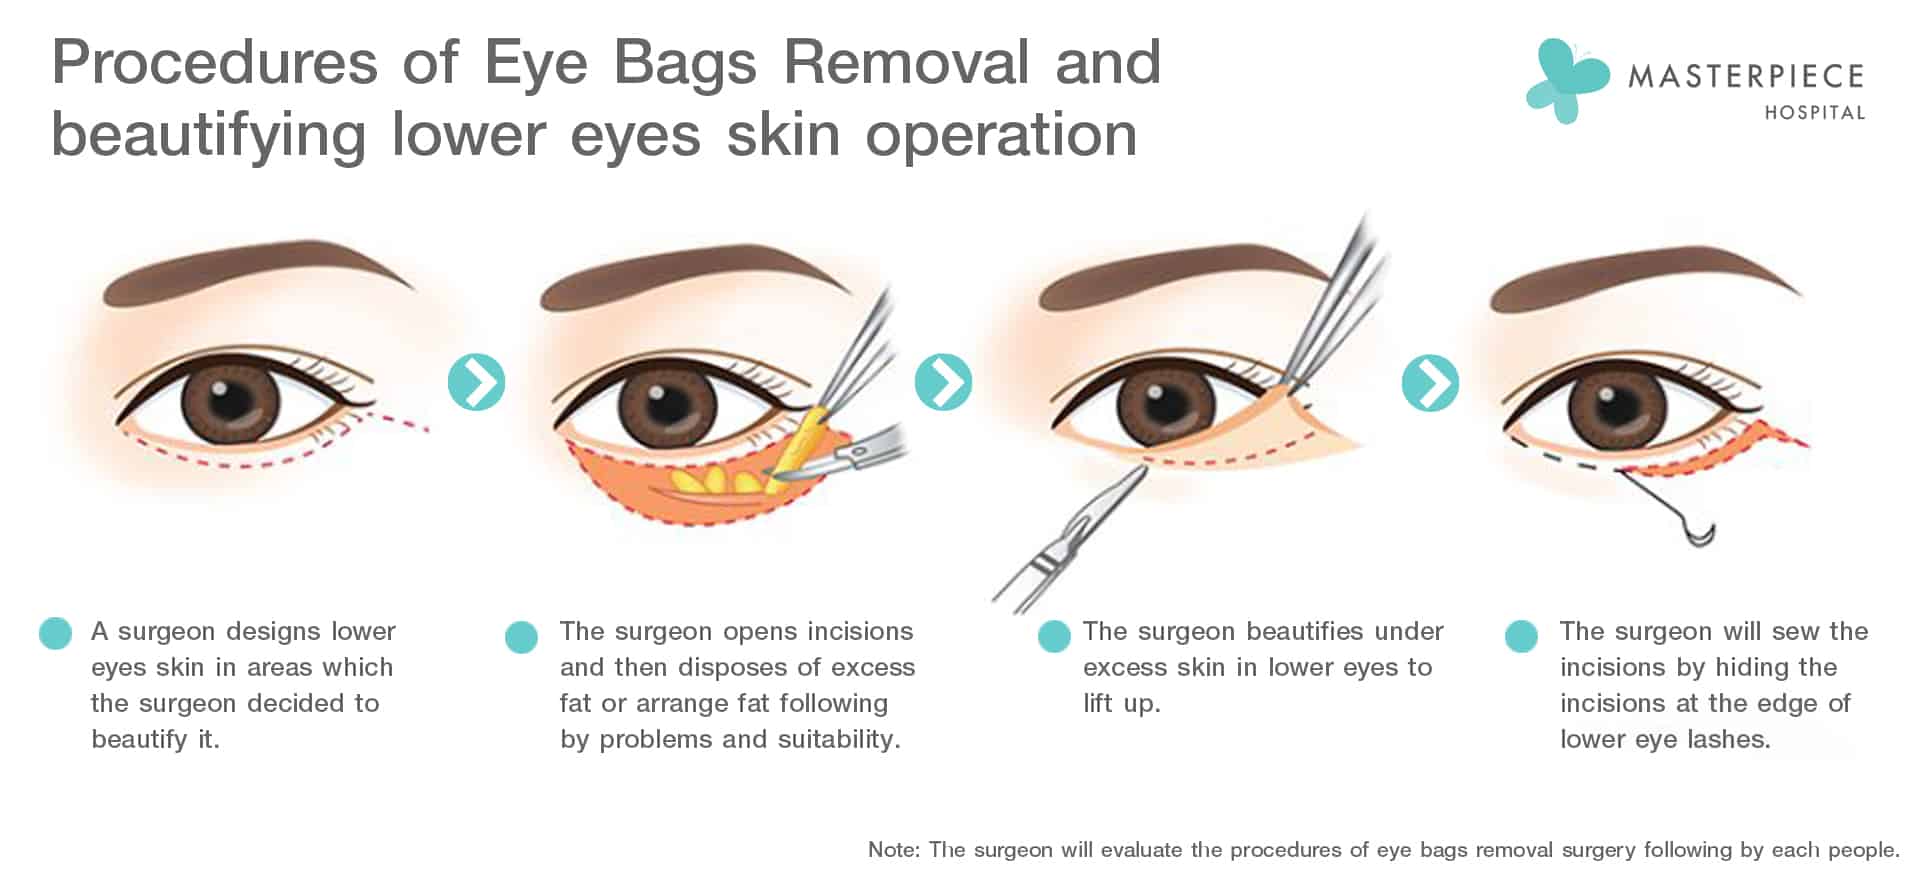 Procedures of Eye Bags Removal and beautifying lower eyes skin operation